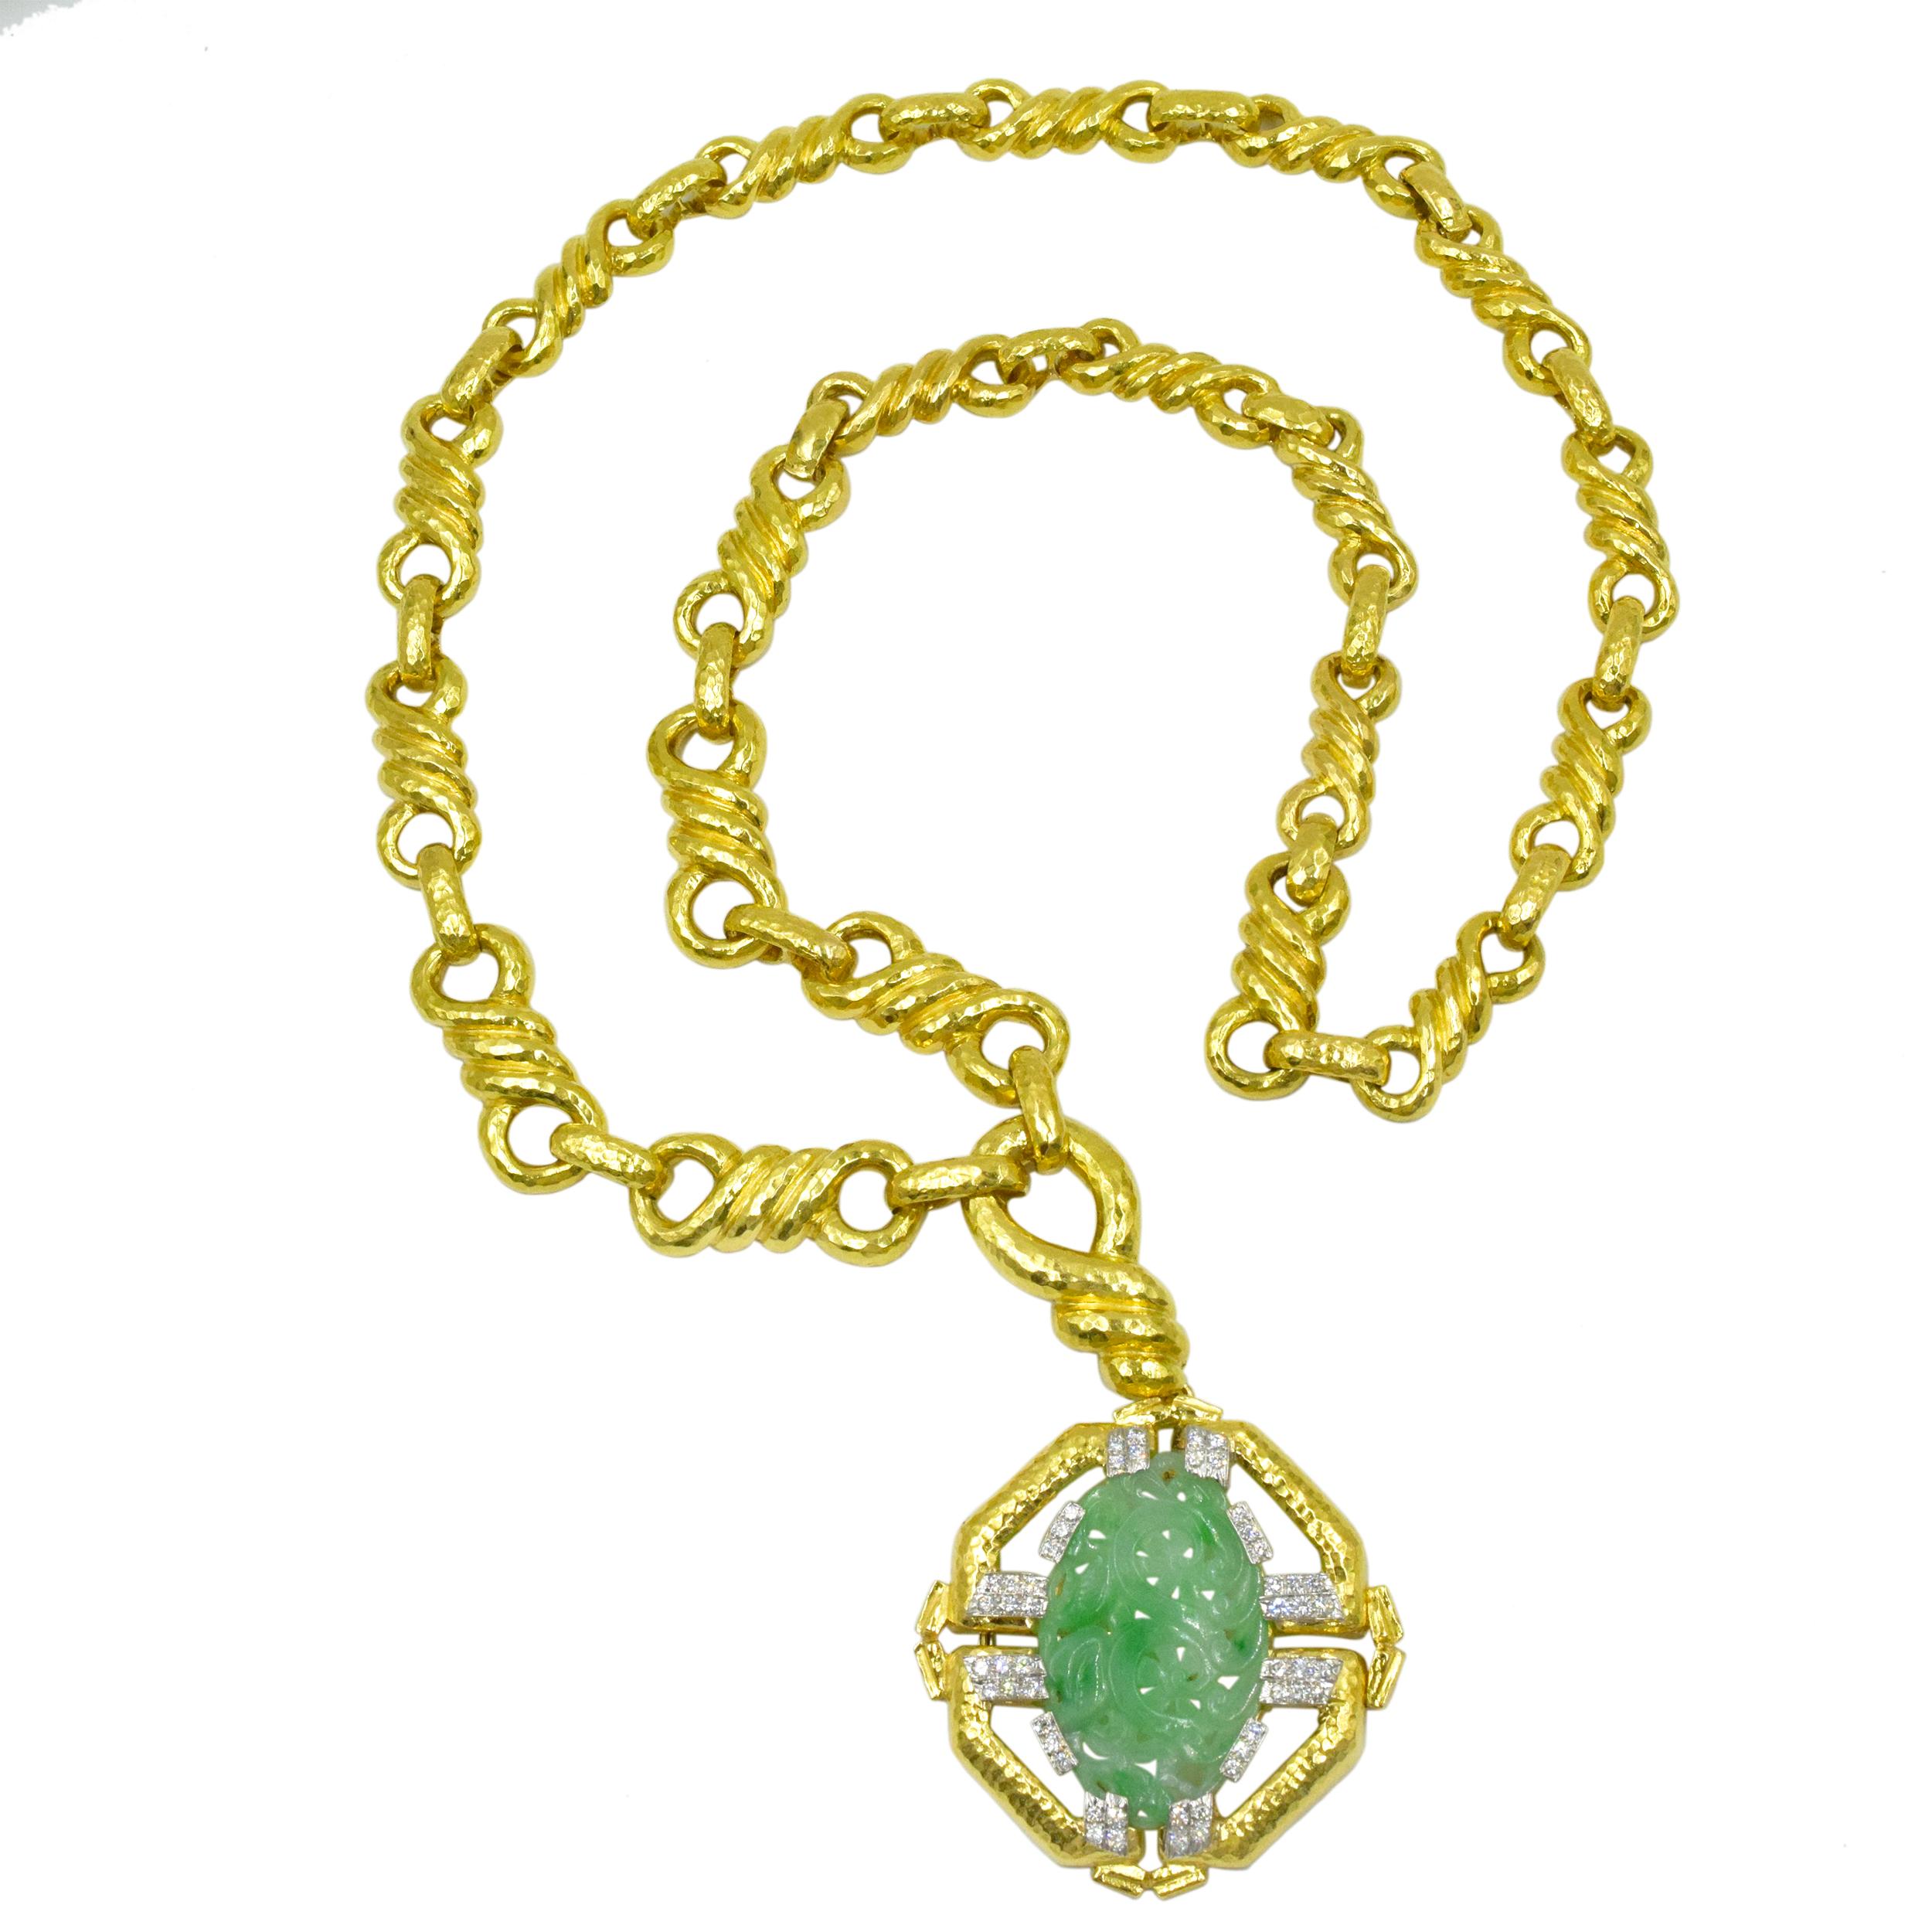 Vintage jade necklace by David Webb, crafted in 18k yellow gold and platinum, featuring versatile detachable, carved jade pendant with diamond accents set in platinum, that can be also worn as a brooch. Circa 1970. Pendant inscribed Webb 18k, Plat.,